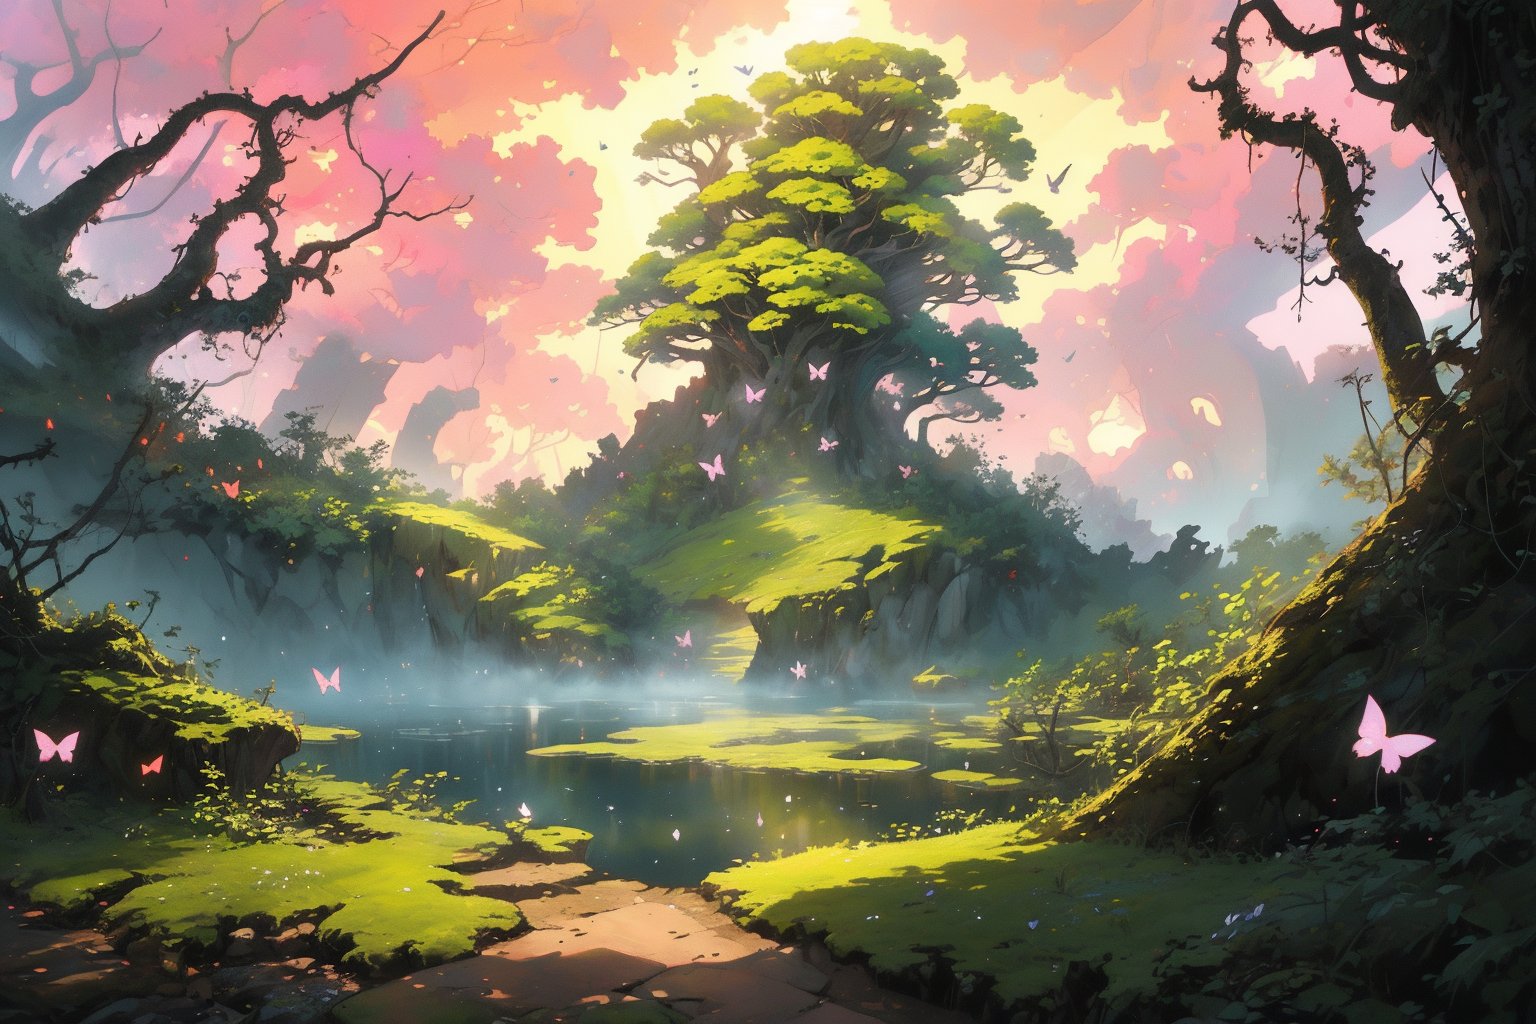 A masterwork of whimsical wonder: a pastel-hued landscape wide view of a deep, thick forest, where dappled sunlight filters through leaves, casting godrays on the misty terrain. A serene lake glimmers in the distance, surrounded by ruins overgrown with vines, moss, and crystals. Amidst this enchanting setting, butterflies flutter amidst fireflies, while flowers bloom beneath the warm, volumetric lighting of a dramatic sunset sky, where puffy clouds drift lazily across the horizon.